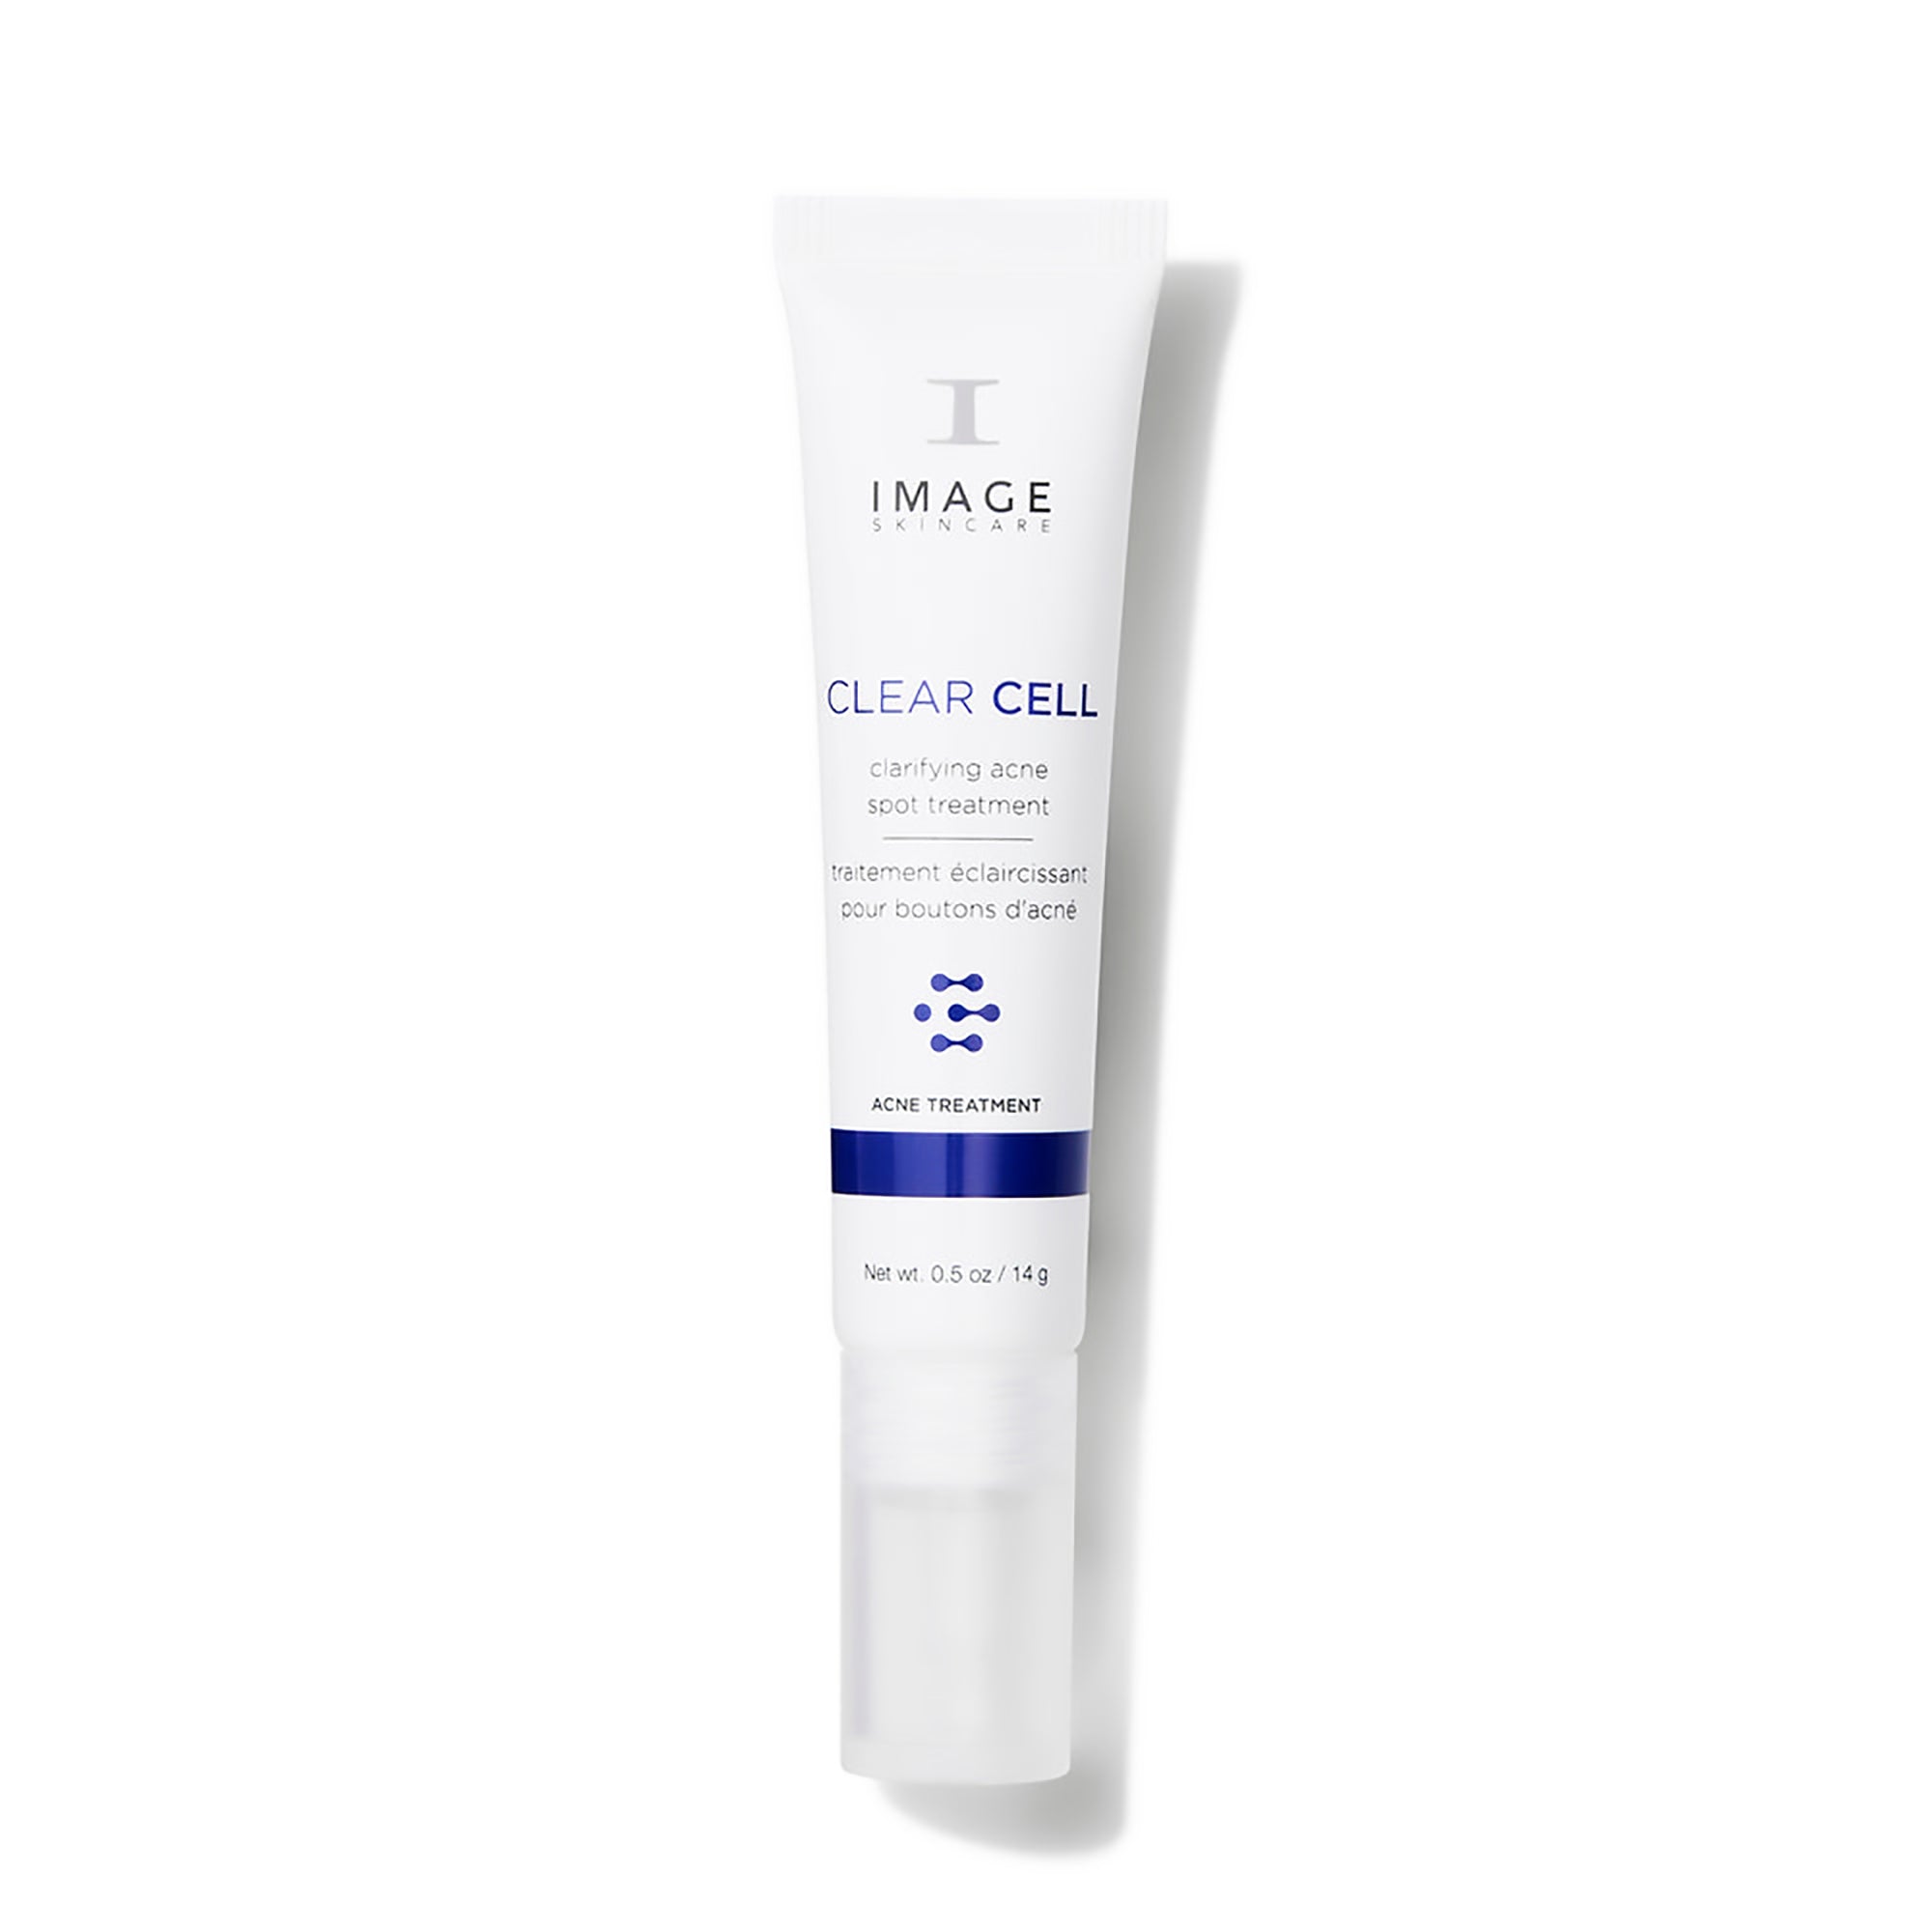 Image Skincare Clear Cell Clarifying Acne Spot Treatment / 0.5OZ